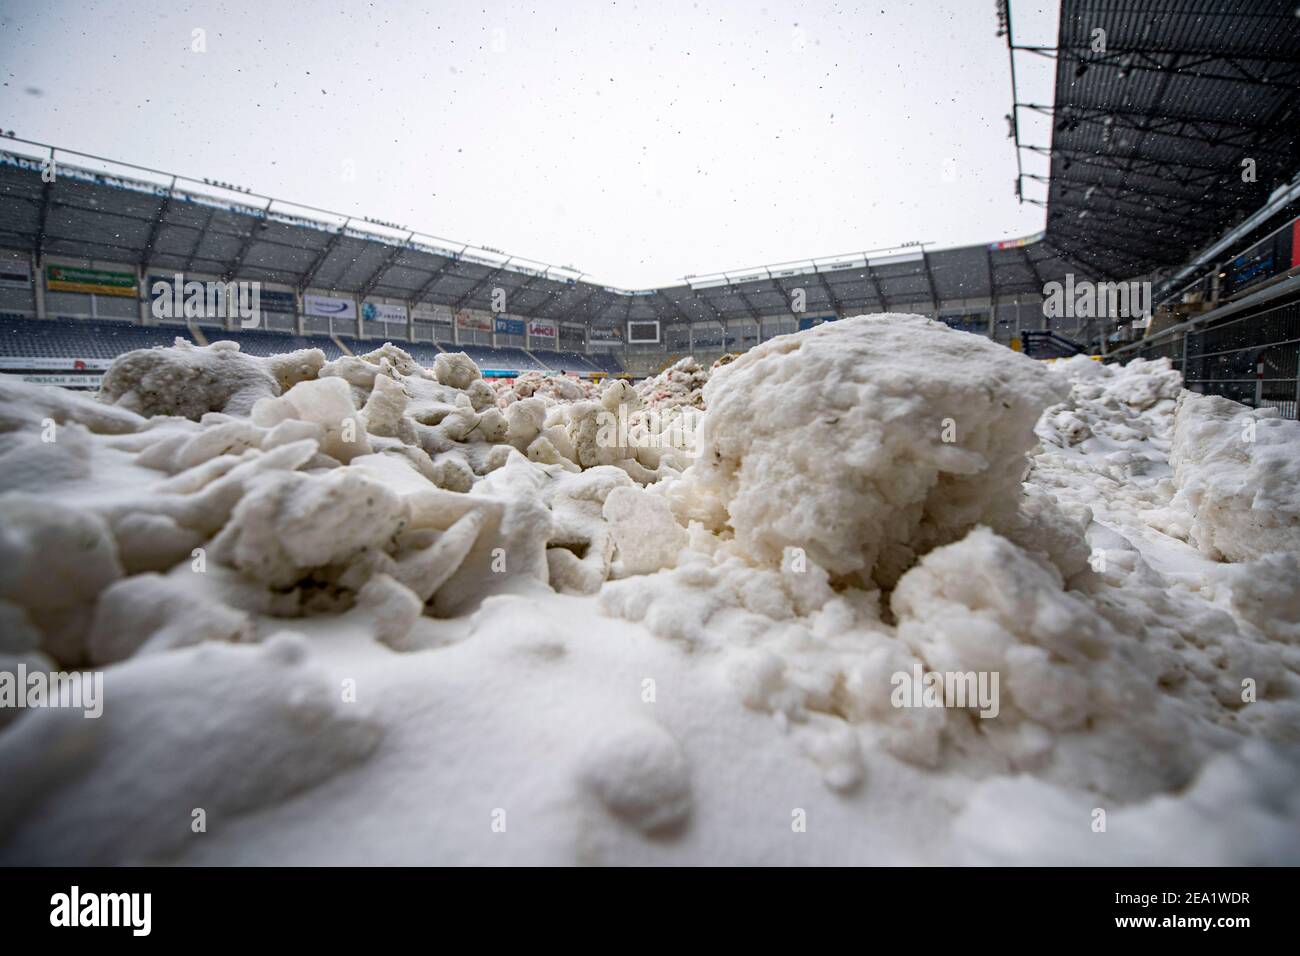 Paderborn, Germany. 07th Feb, 2021. Football: 2. Bundesliga, SC Paderborn 07 - 1. FC Heidenheim, Matchday 20, at Benteler Arena. Chunks of snow are lying on the side of the pitch. Due to the heavy snowfall, the match has been cancelled shortly before kick-off. Credit: David Inderlied/dpa - IMPORTANT NOTE: In accordance with the regulations of the DFL Deutsche Fußball Liga and/or the DFB Deutscher Fußball-Bund, it is prohibited to use or have used photographs taken in the stadium and/or of the match in the form of sequence pictures and/or video-like photo series./dpa/Alamy Live News Stock Photo